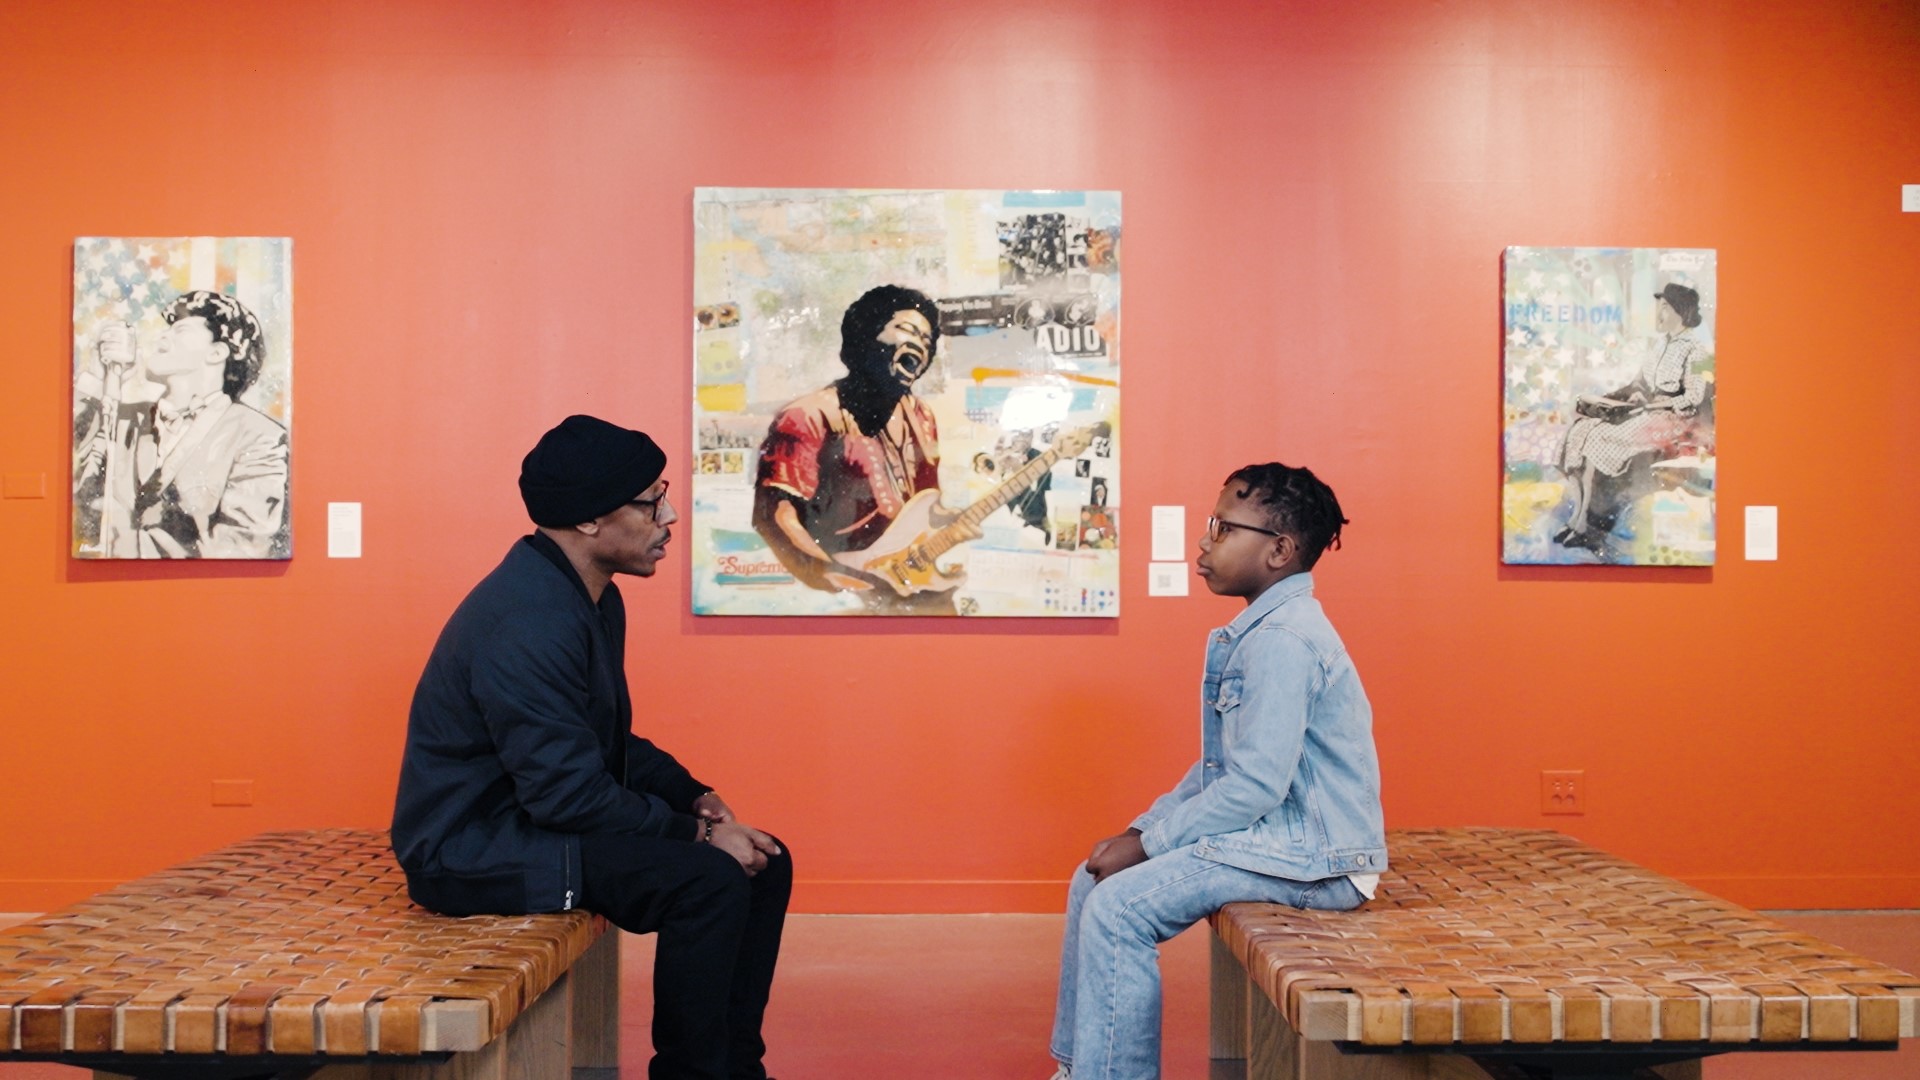 Chris and his 11-year-old son Amari talk about what has made them feel proud to be Black.